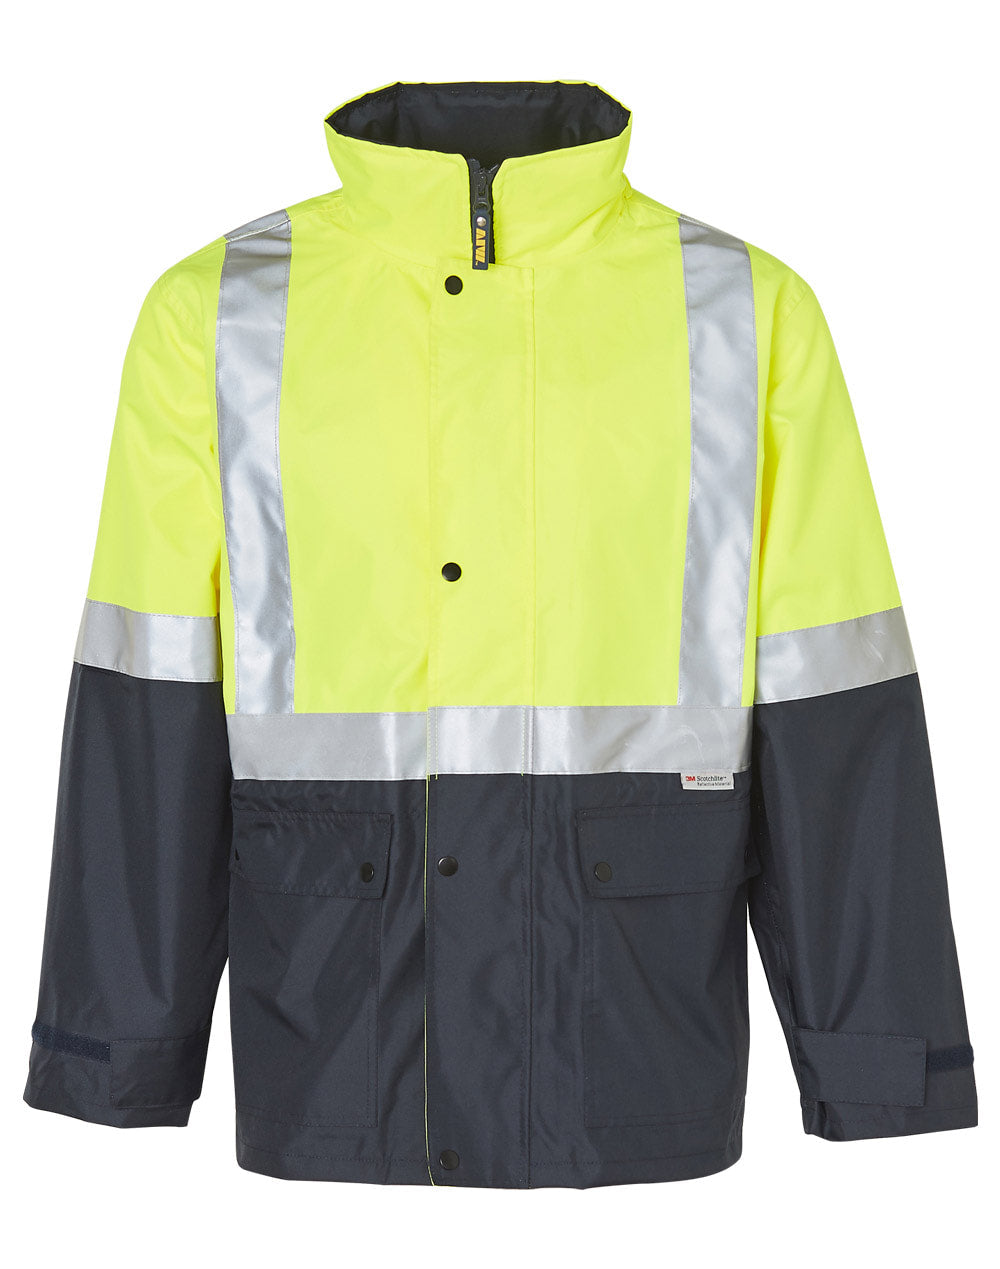 AIW SW18A HI-VIS SAFETY JACKET WITH MESH LINING & 3M TAPES